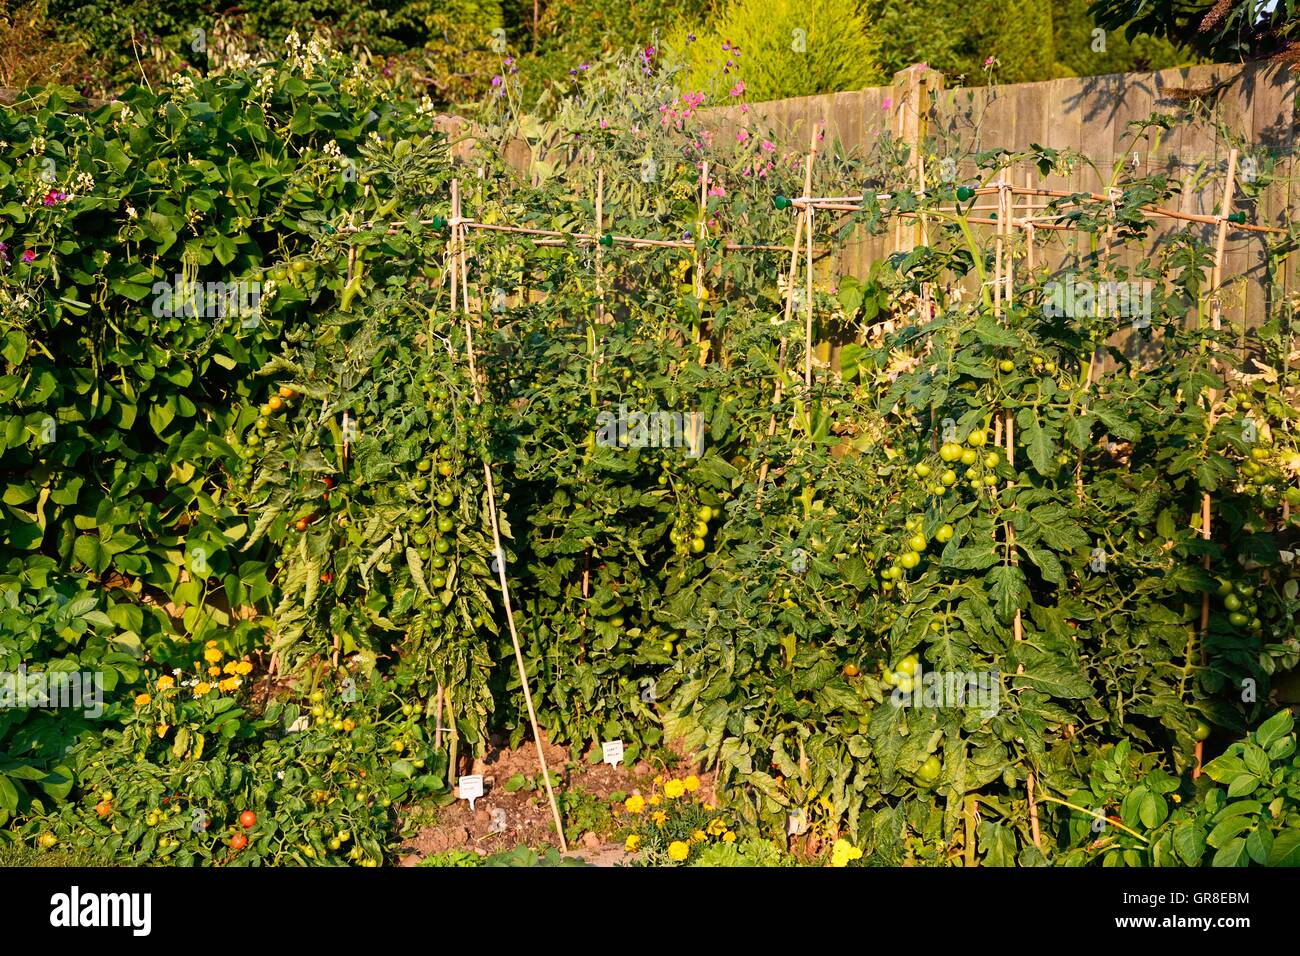 Tomatoes and runner beans growing in a vegetable plot, England, UK, Western Europe. Stock Photo